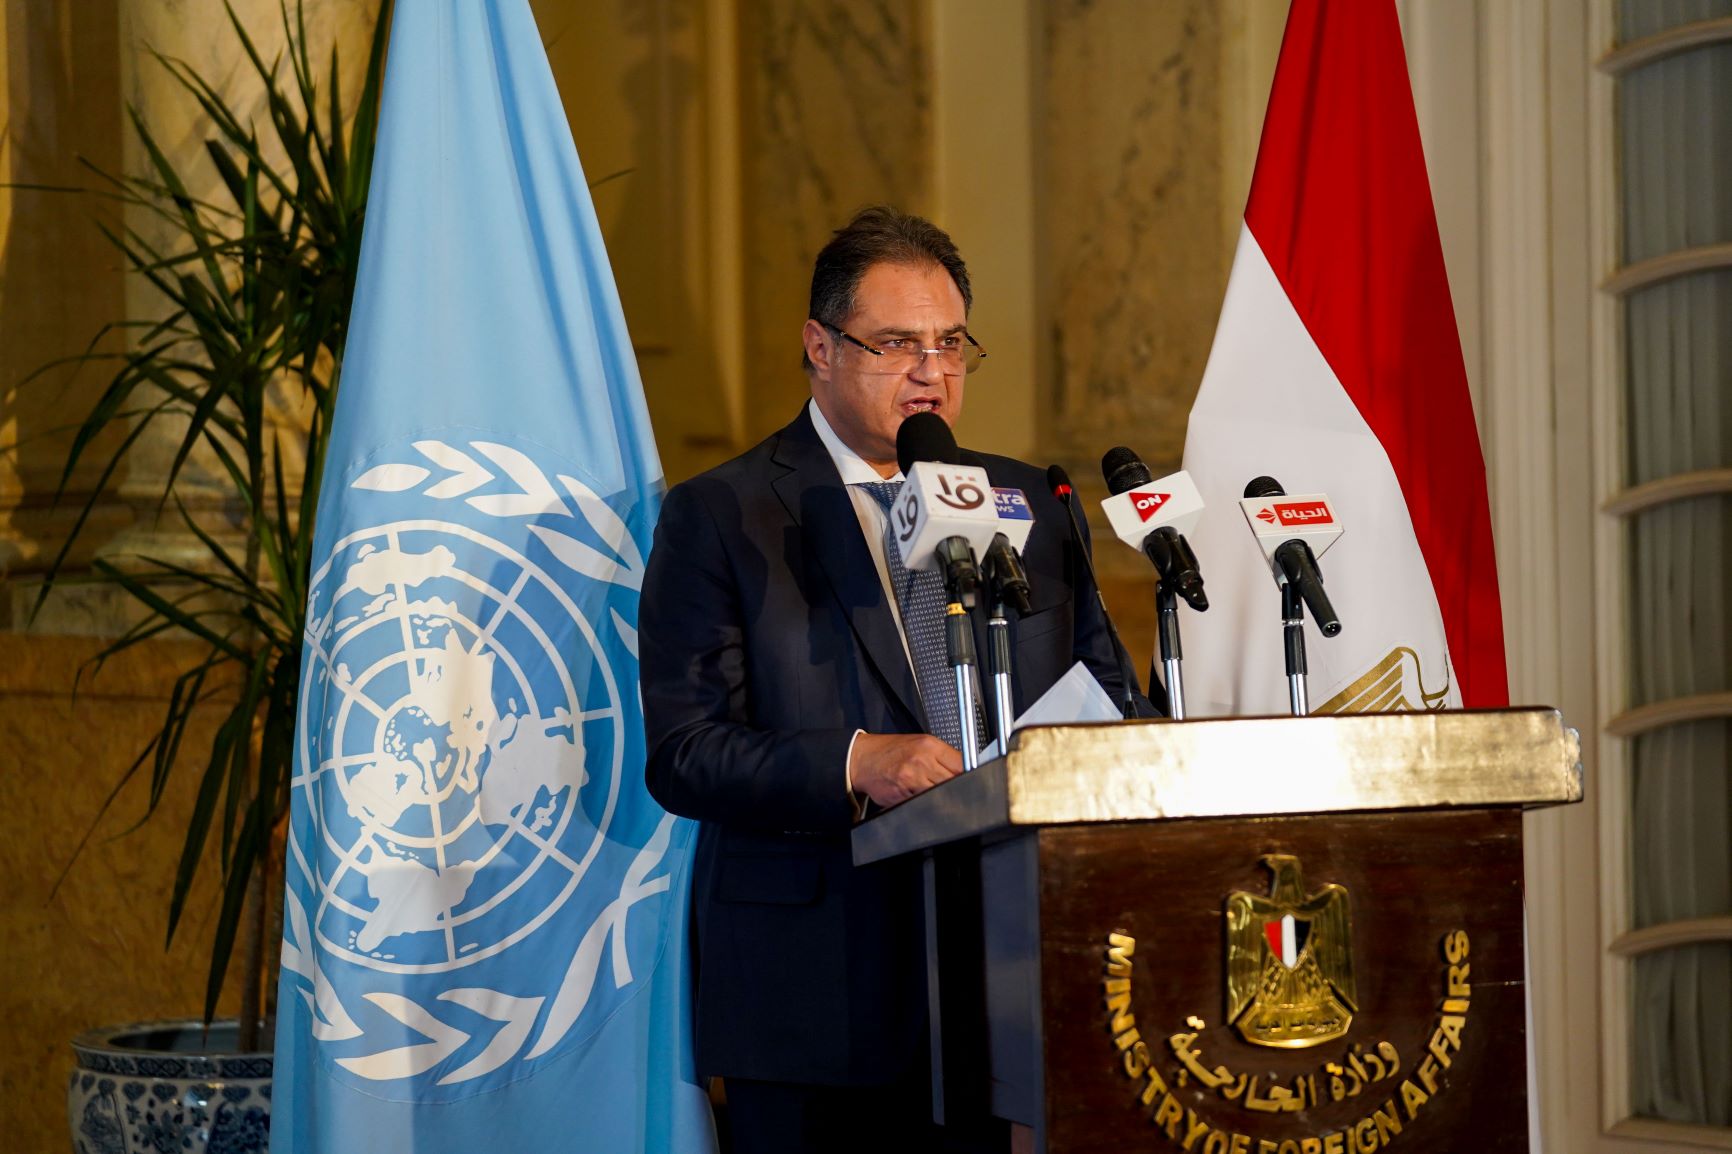 Foreign Affairs Ministry and UN in Egypt Celebrate 76 Years of Successful Partnership